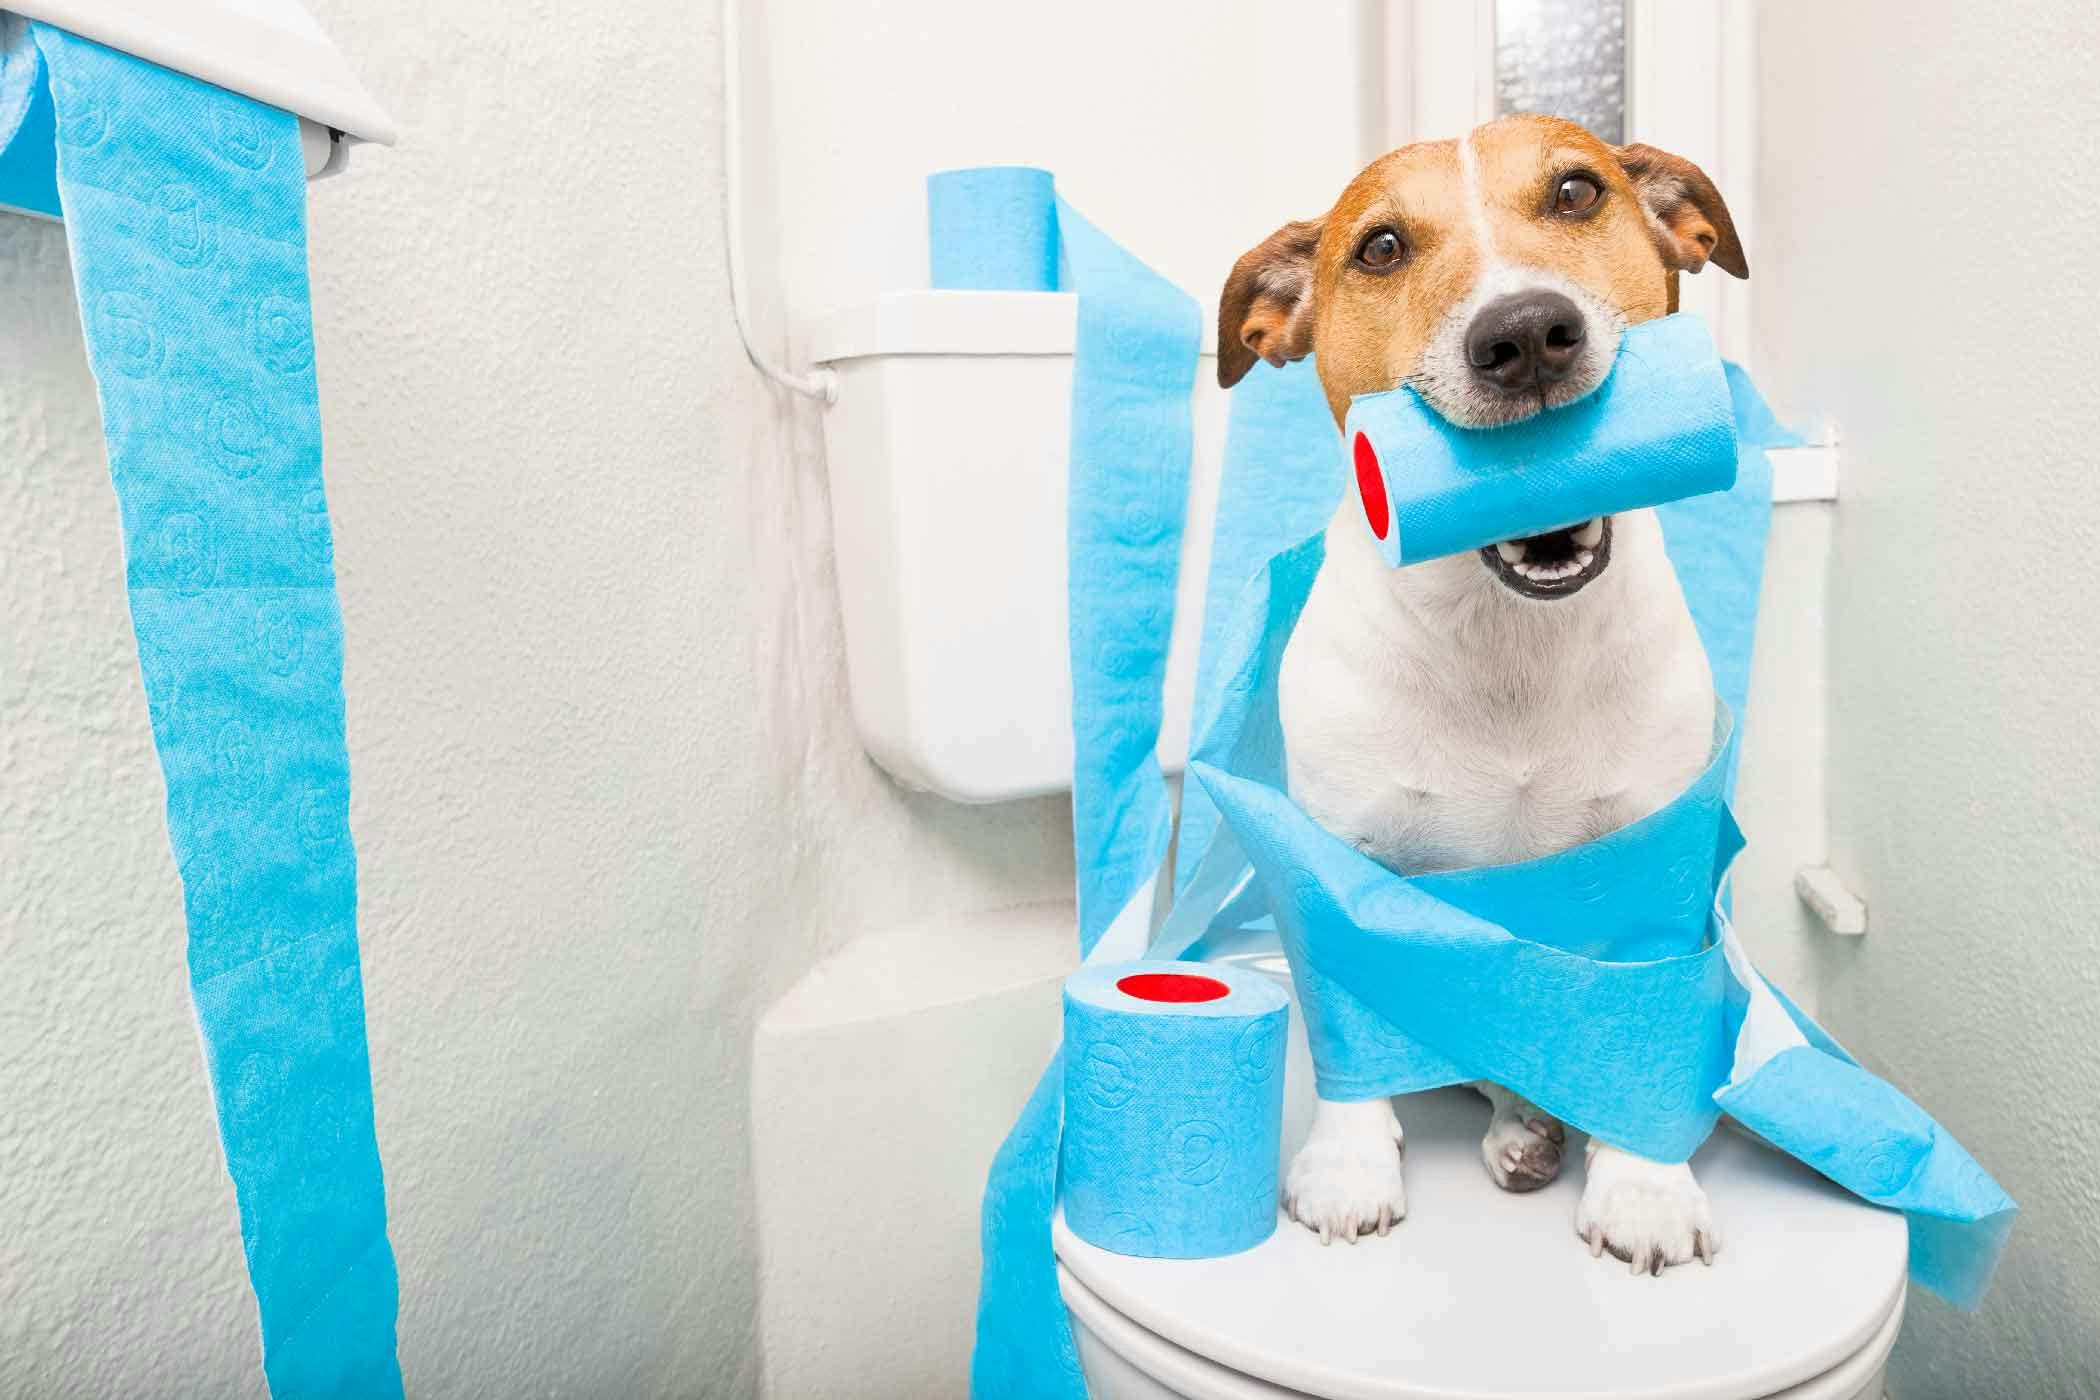 How to Train Your Dog to Use the Toilet Wag!